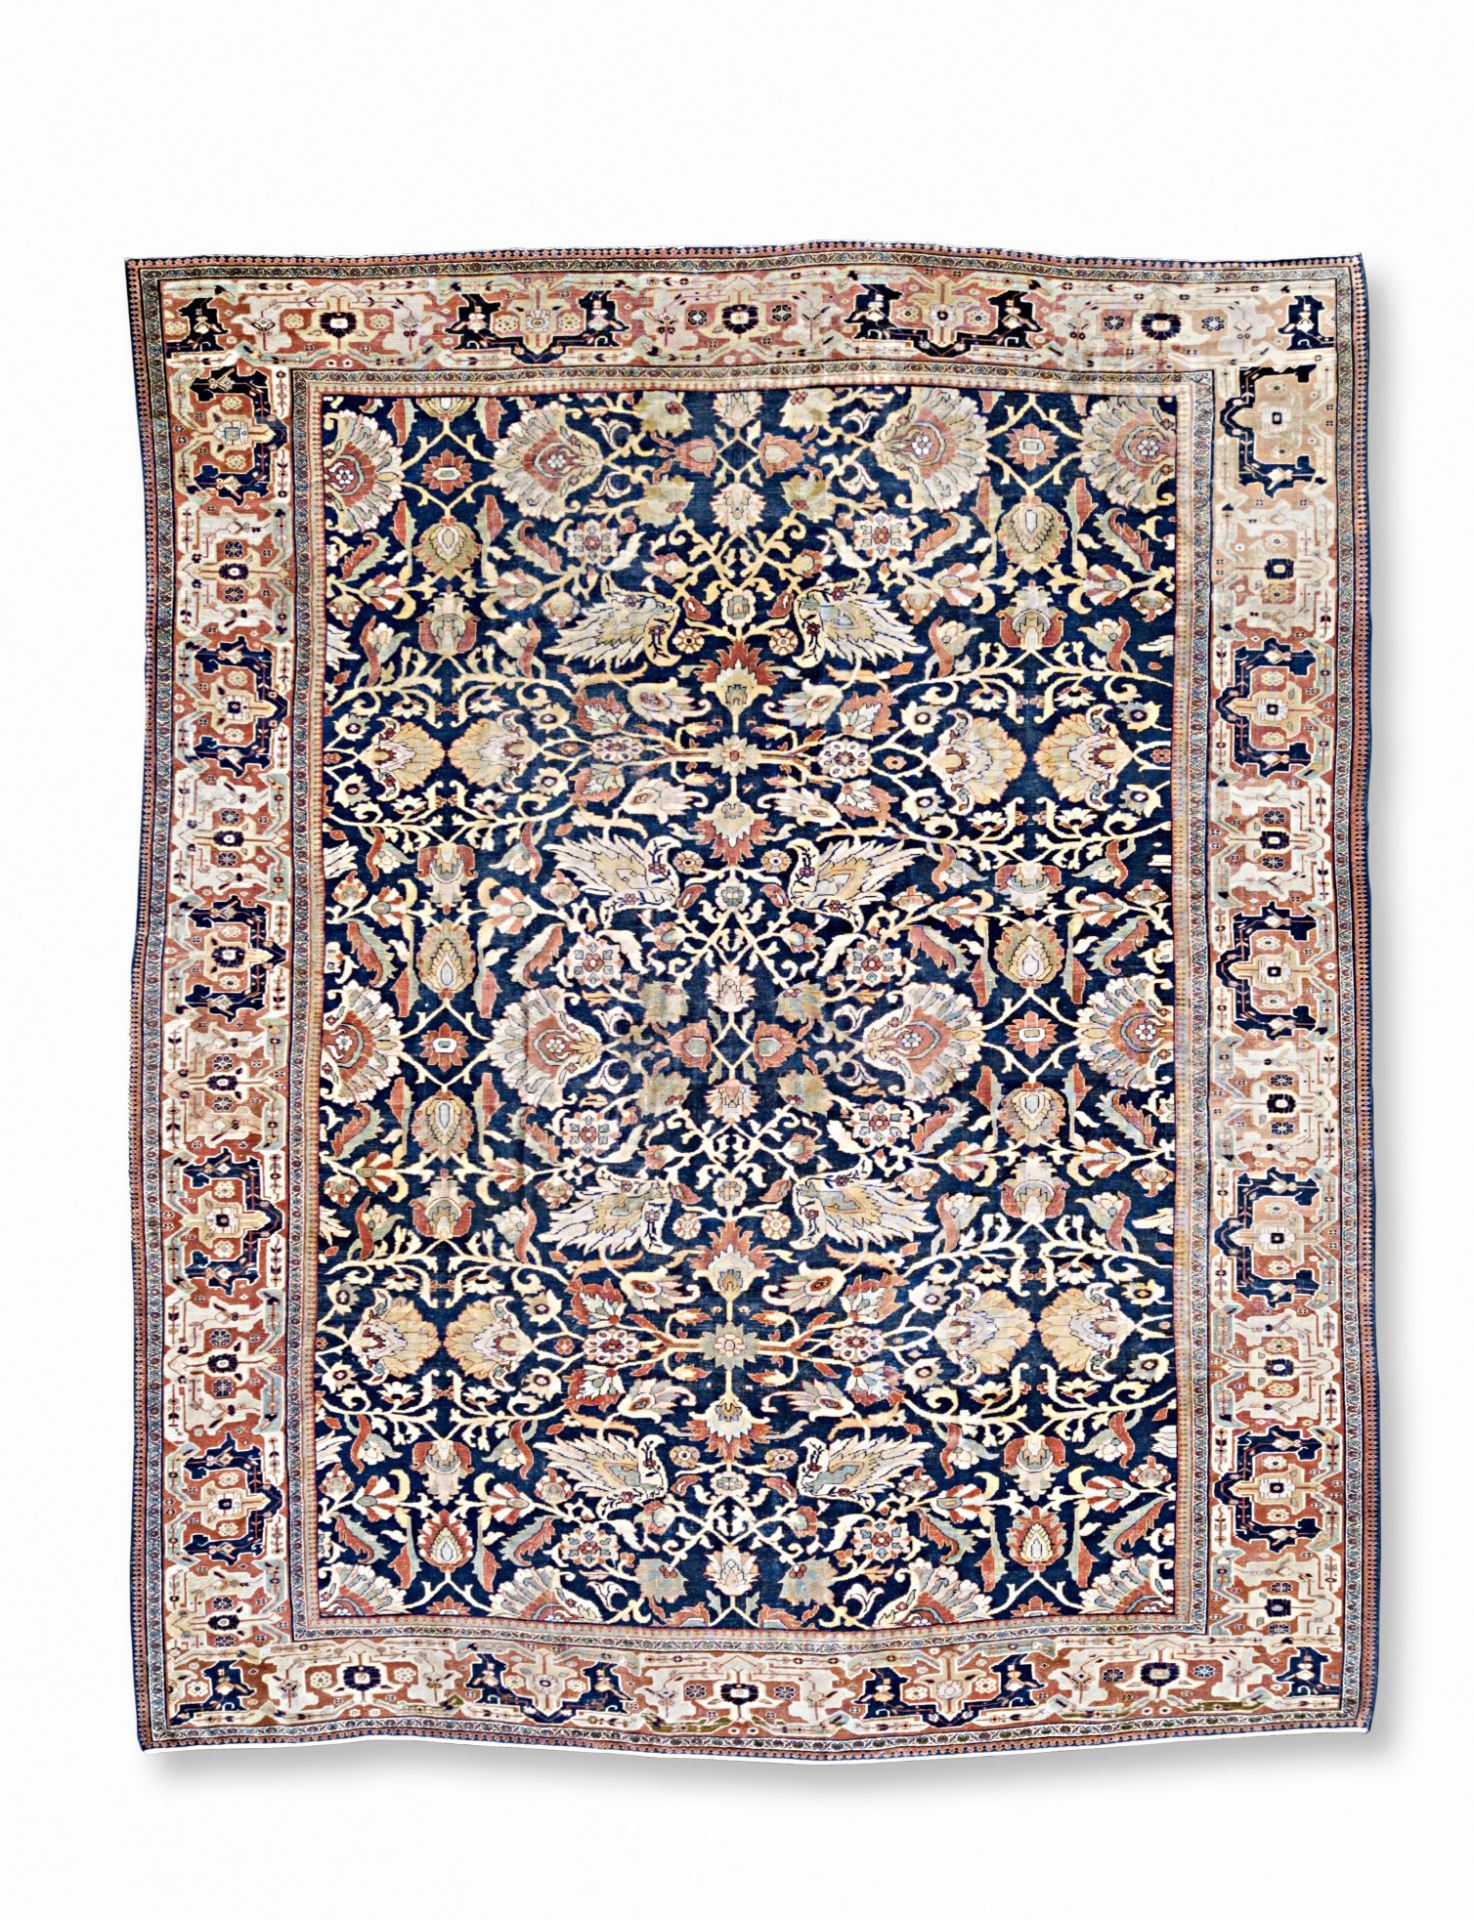 A very large Mahal carpet North West Persia 638cm x 533cm